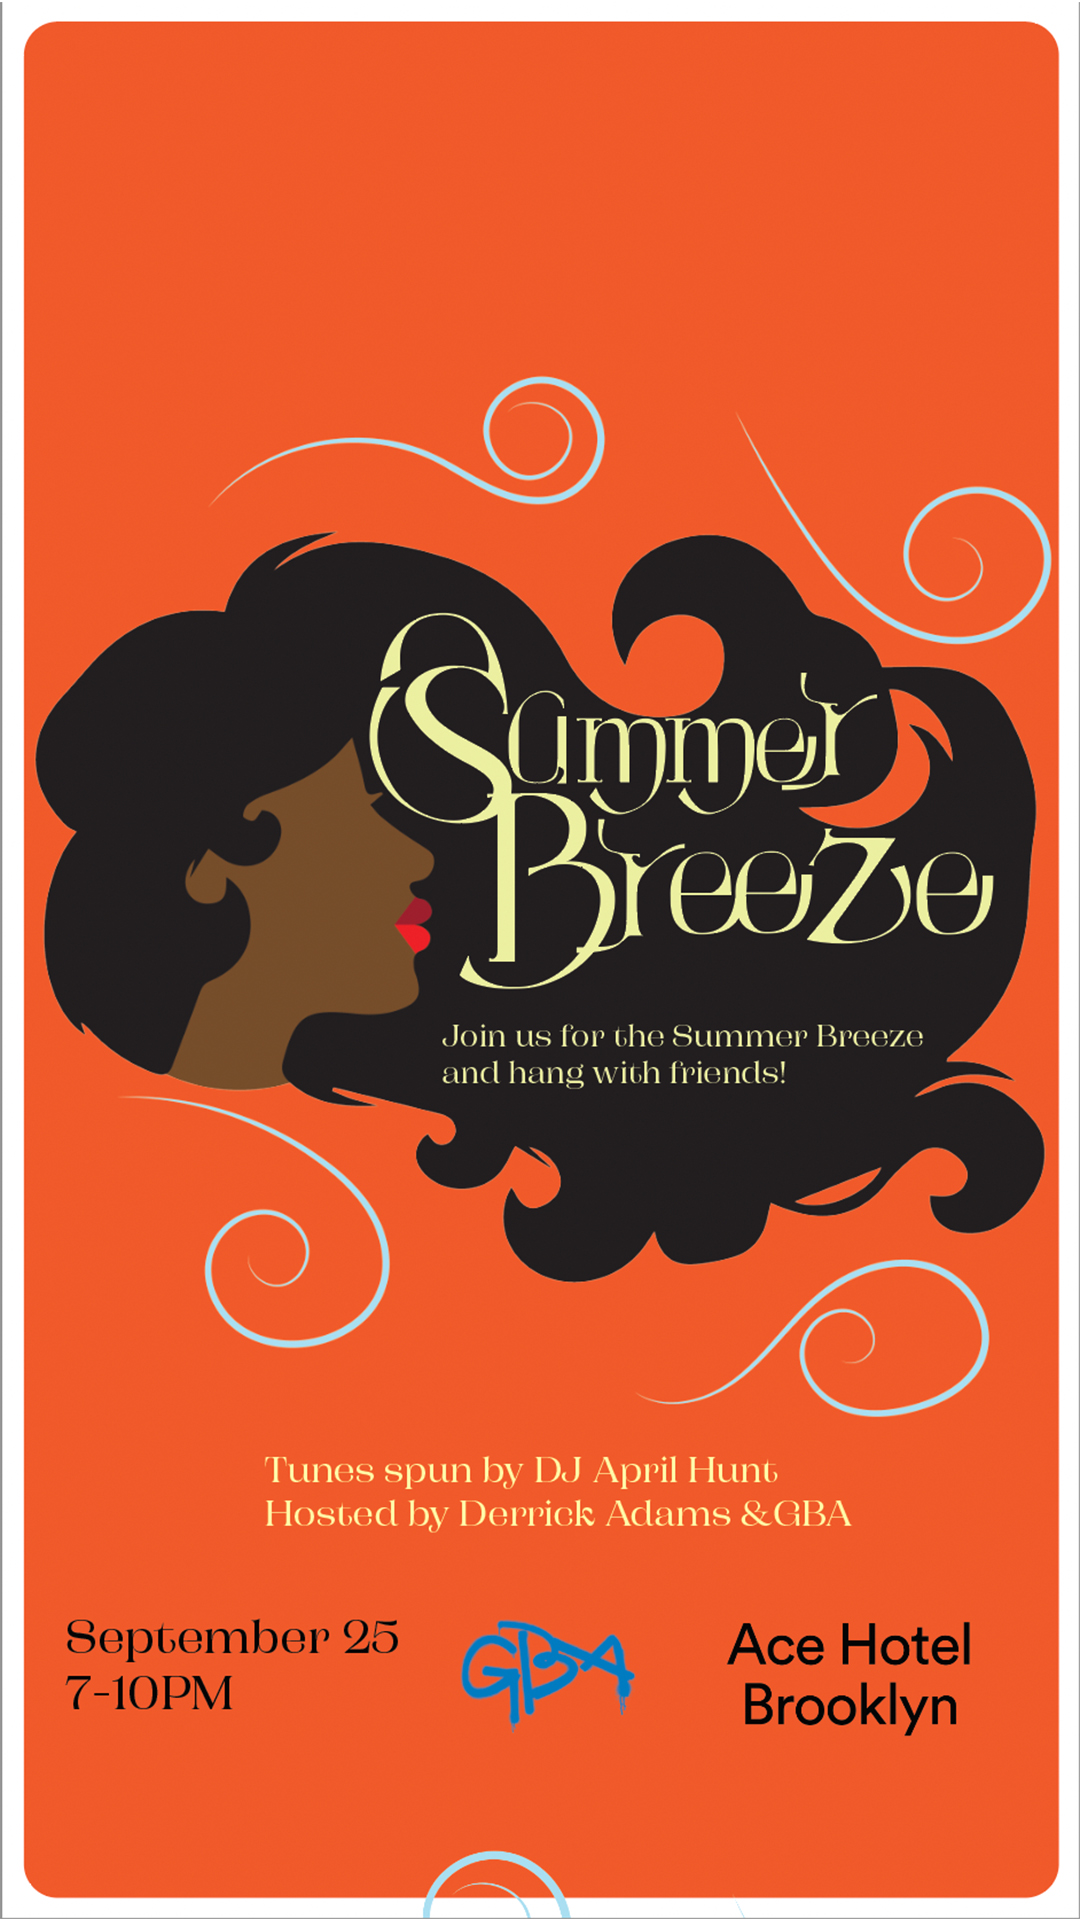 Summer breeze promo flyer for Tuesday event with GBA